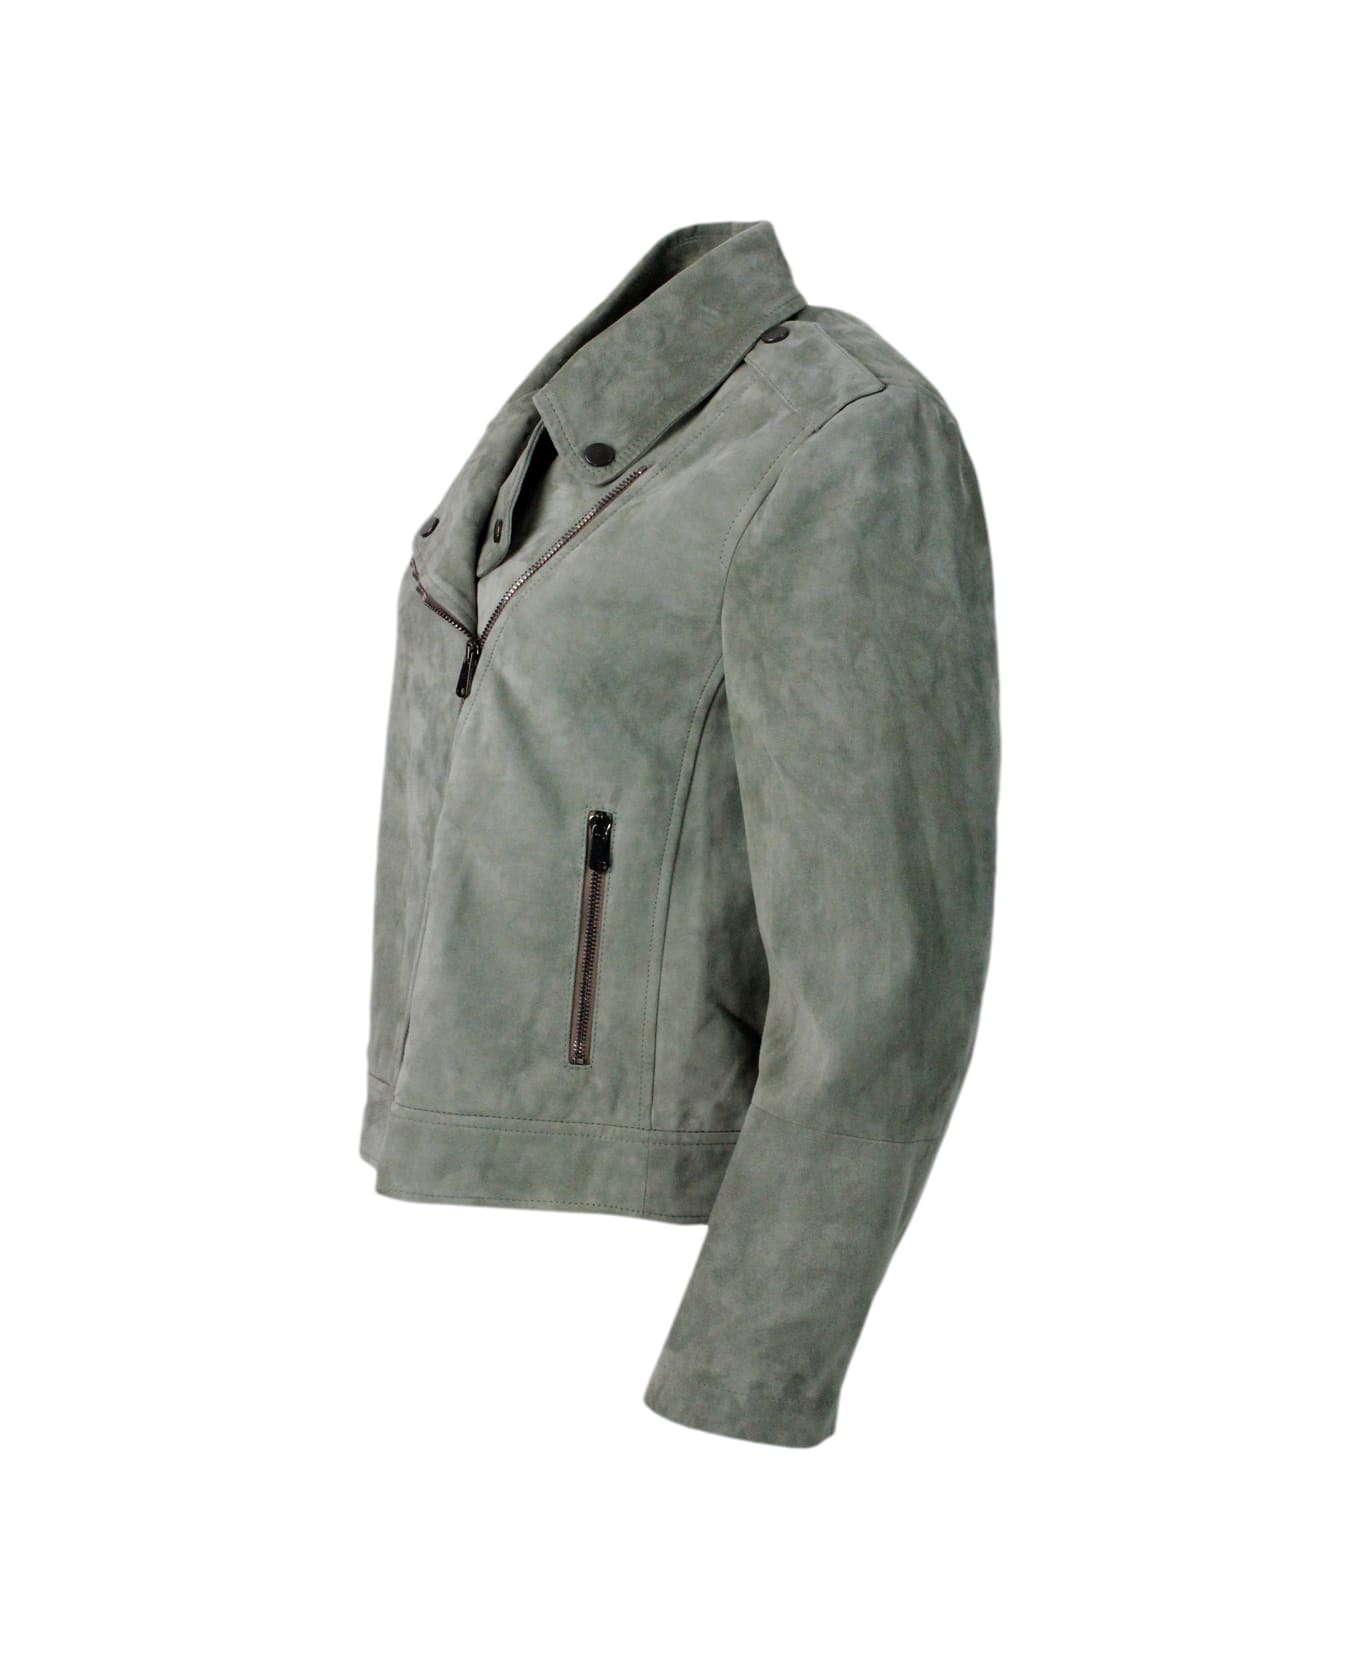 Brunello Cucinelli Biker Jacket In Precious And Soft Suede With Rows Of Brilliant Monili Behind The Neck - Green レザージャケット